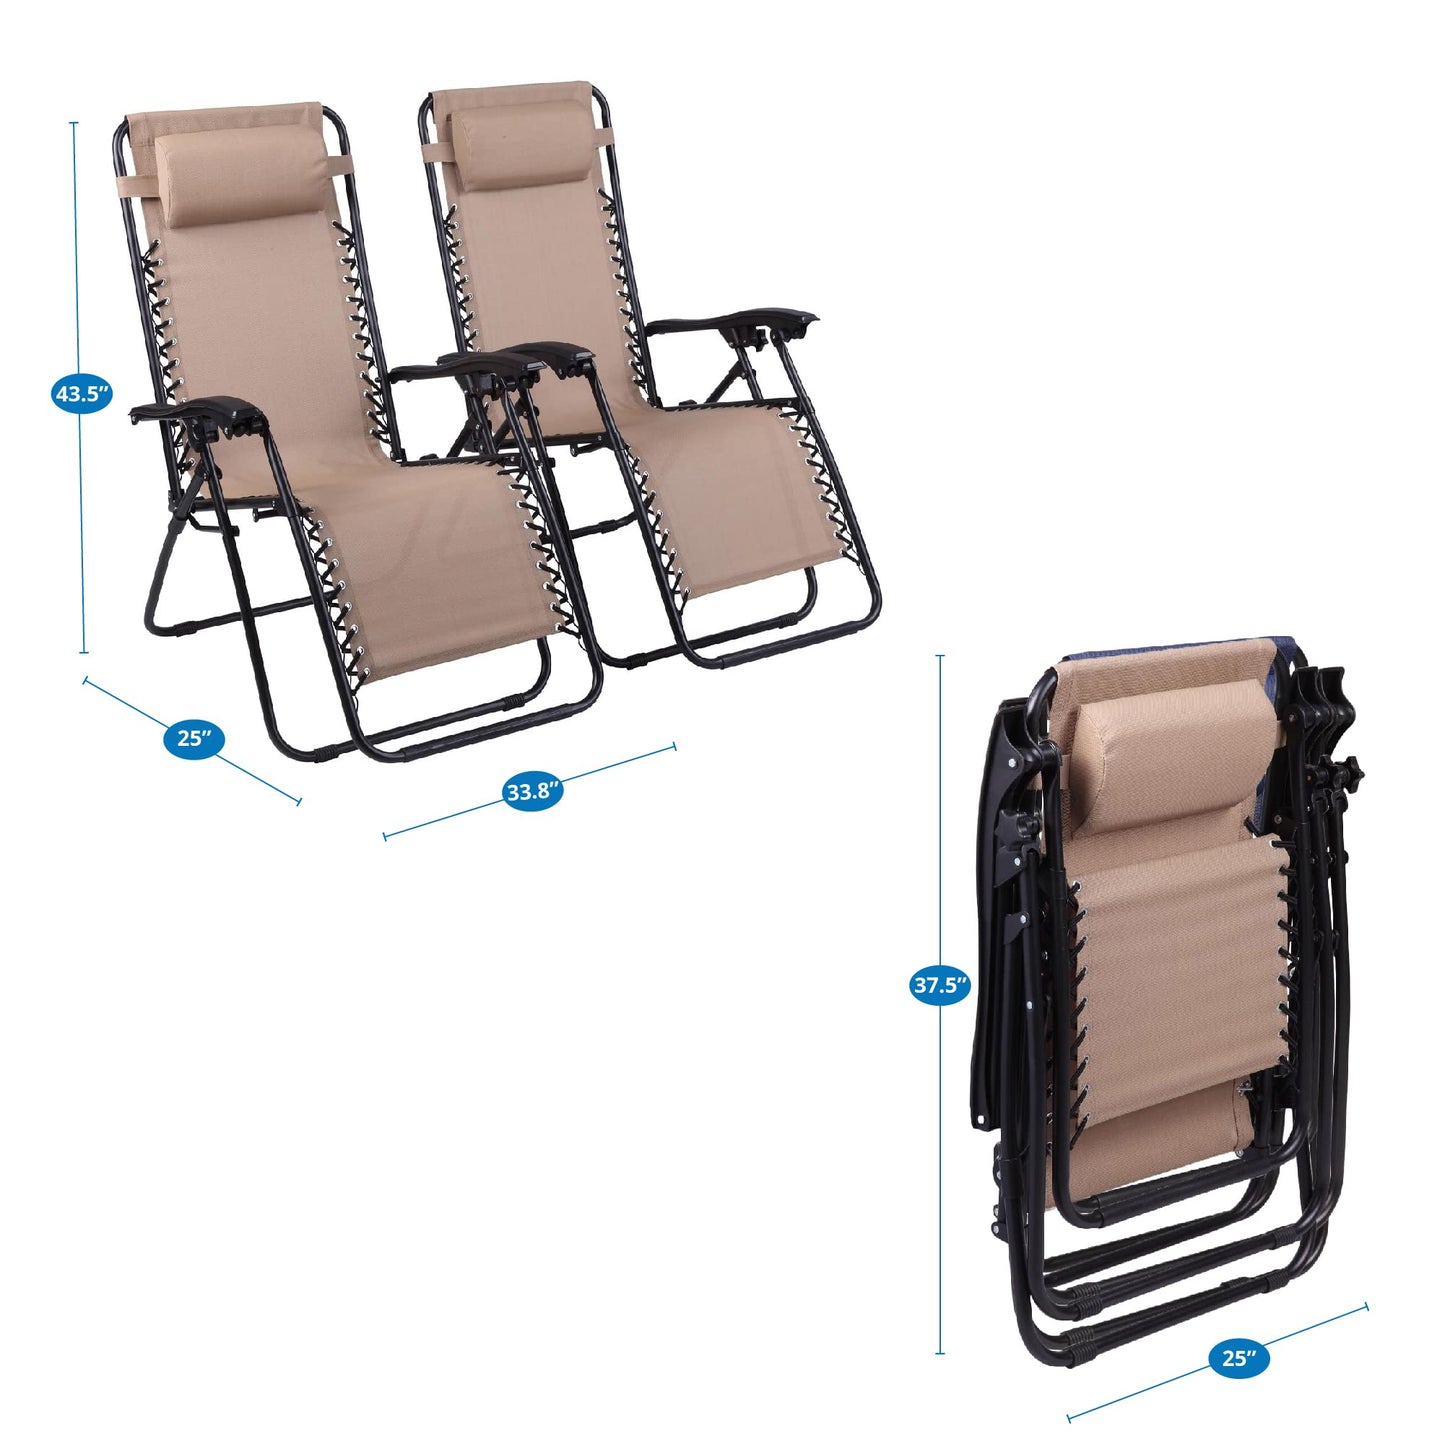 Zero Gravity Chairs Set of 2 Pool Lounge Chair Zero Gravity Recliner Zero Gravity Lounge Chair Antigravity Chairs Anti Gravity Chair Folding Reclining Camping Chair with Headrest by Naomi Home - Cream Modern